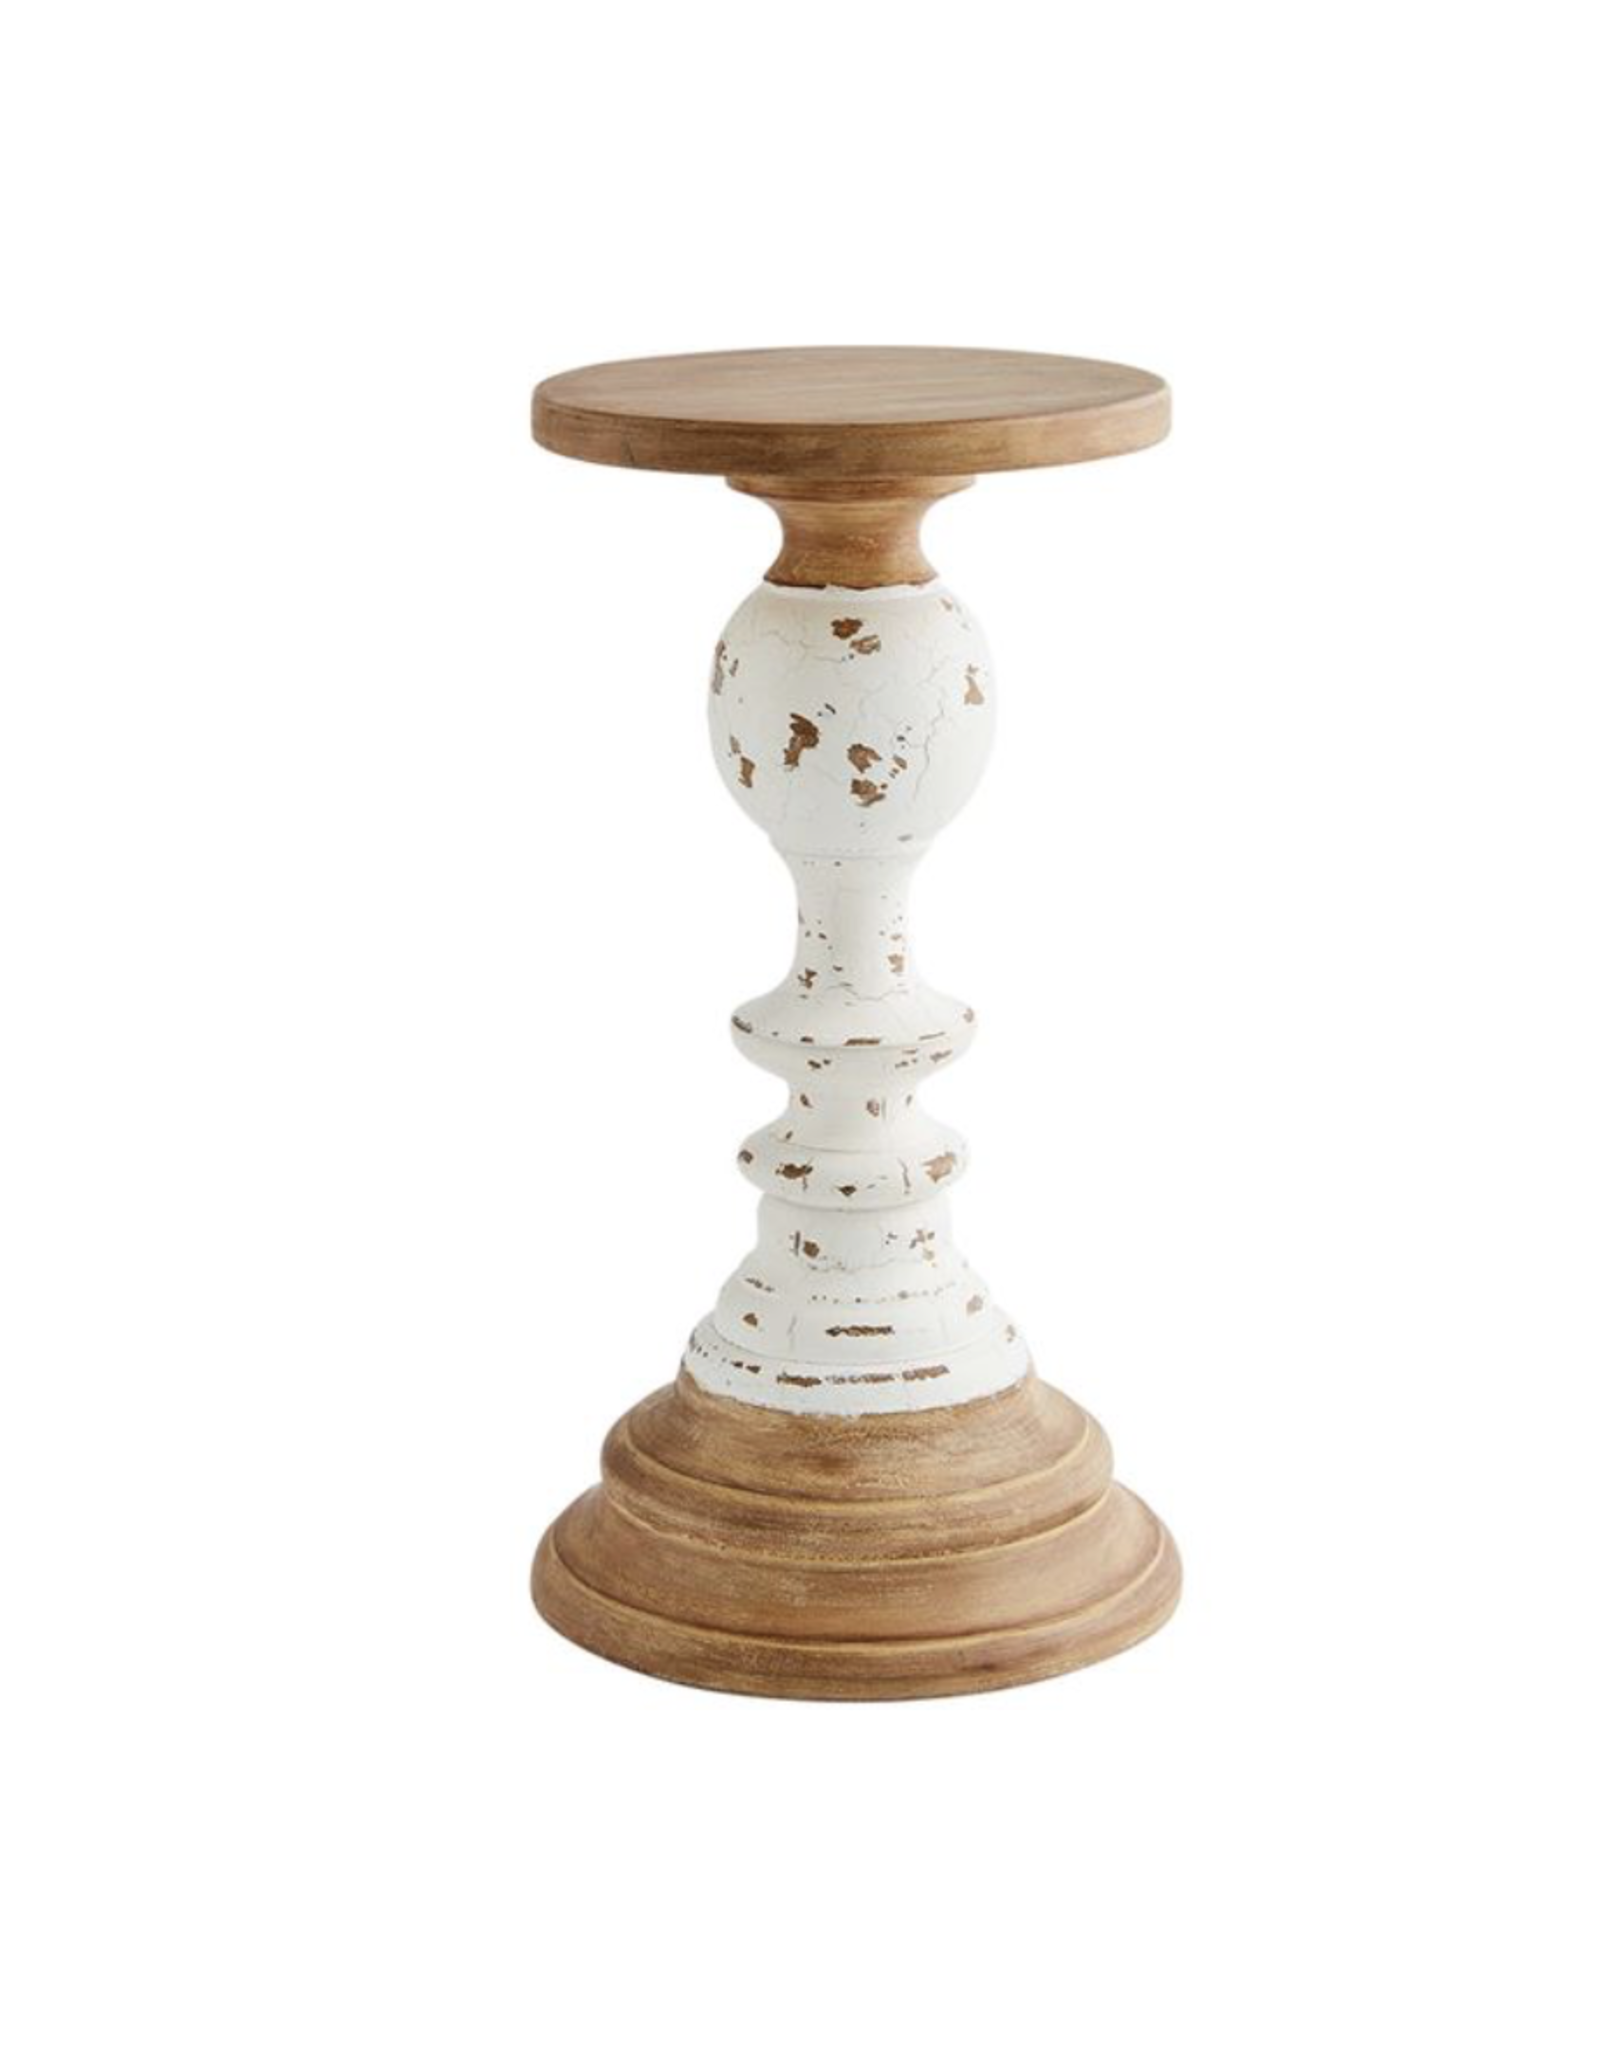 Candlestick Wooden Rustic SM